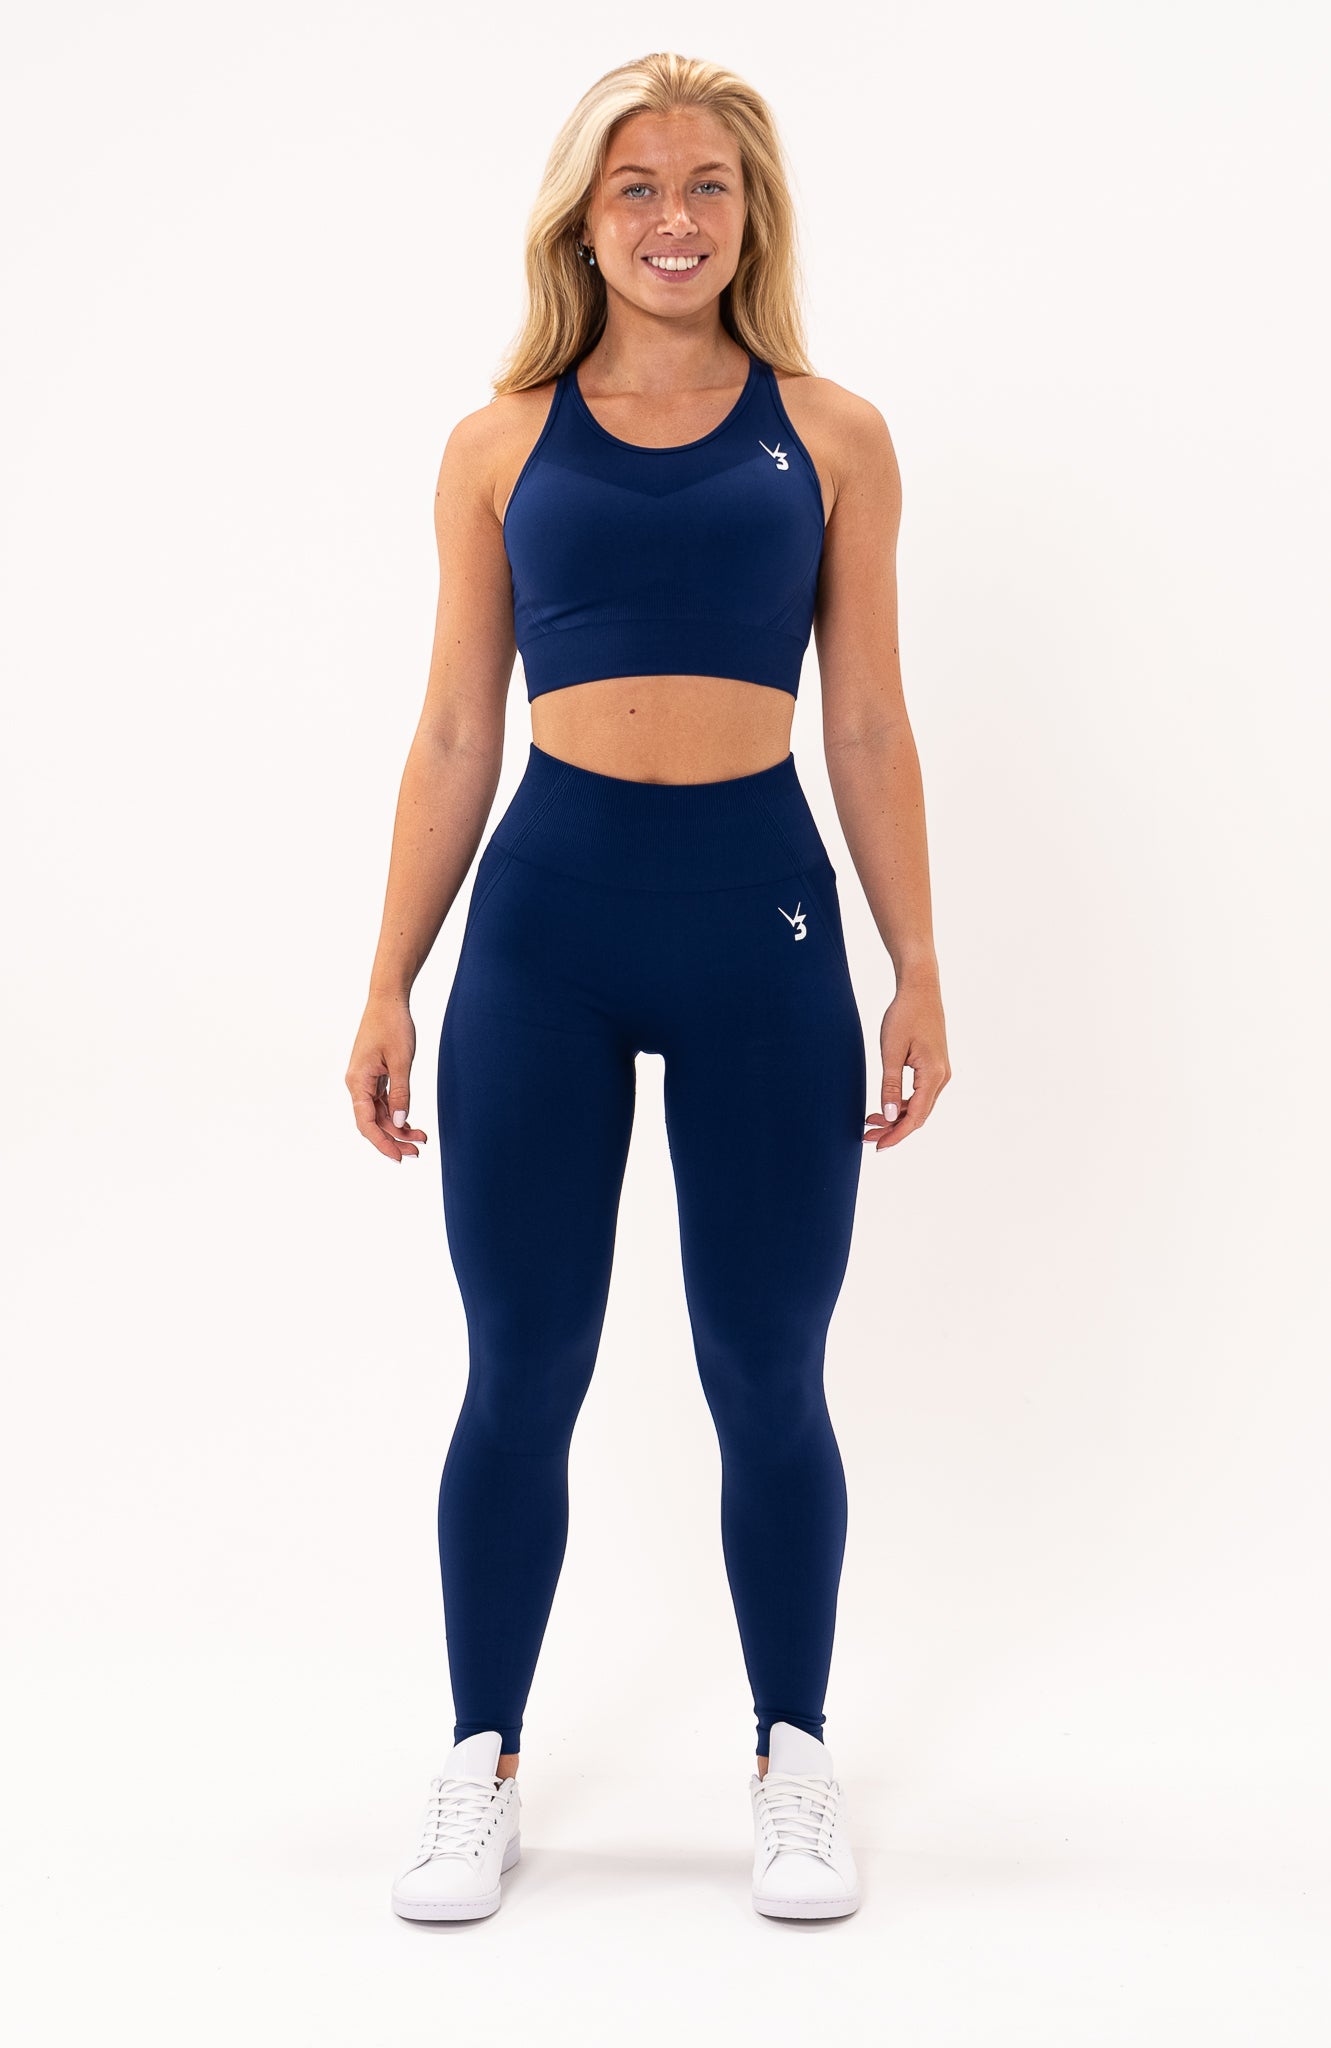 redbaysand Women's Tempo seamless scrunch bum shaping high waisted leggings and training sports bra in royal navy blue – Squat proof sports tights and training bra for Gym workouts training, Running, yoga, bodybuilding and bikini fitness.